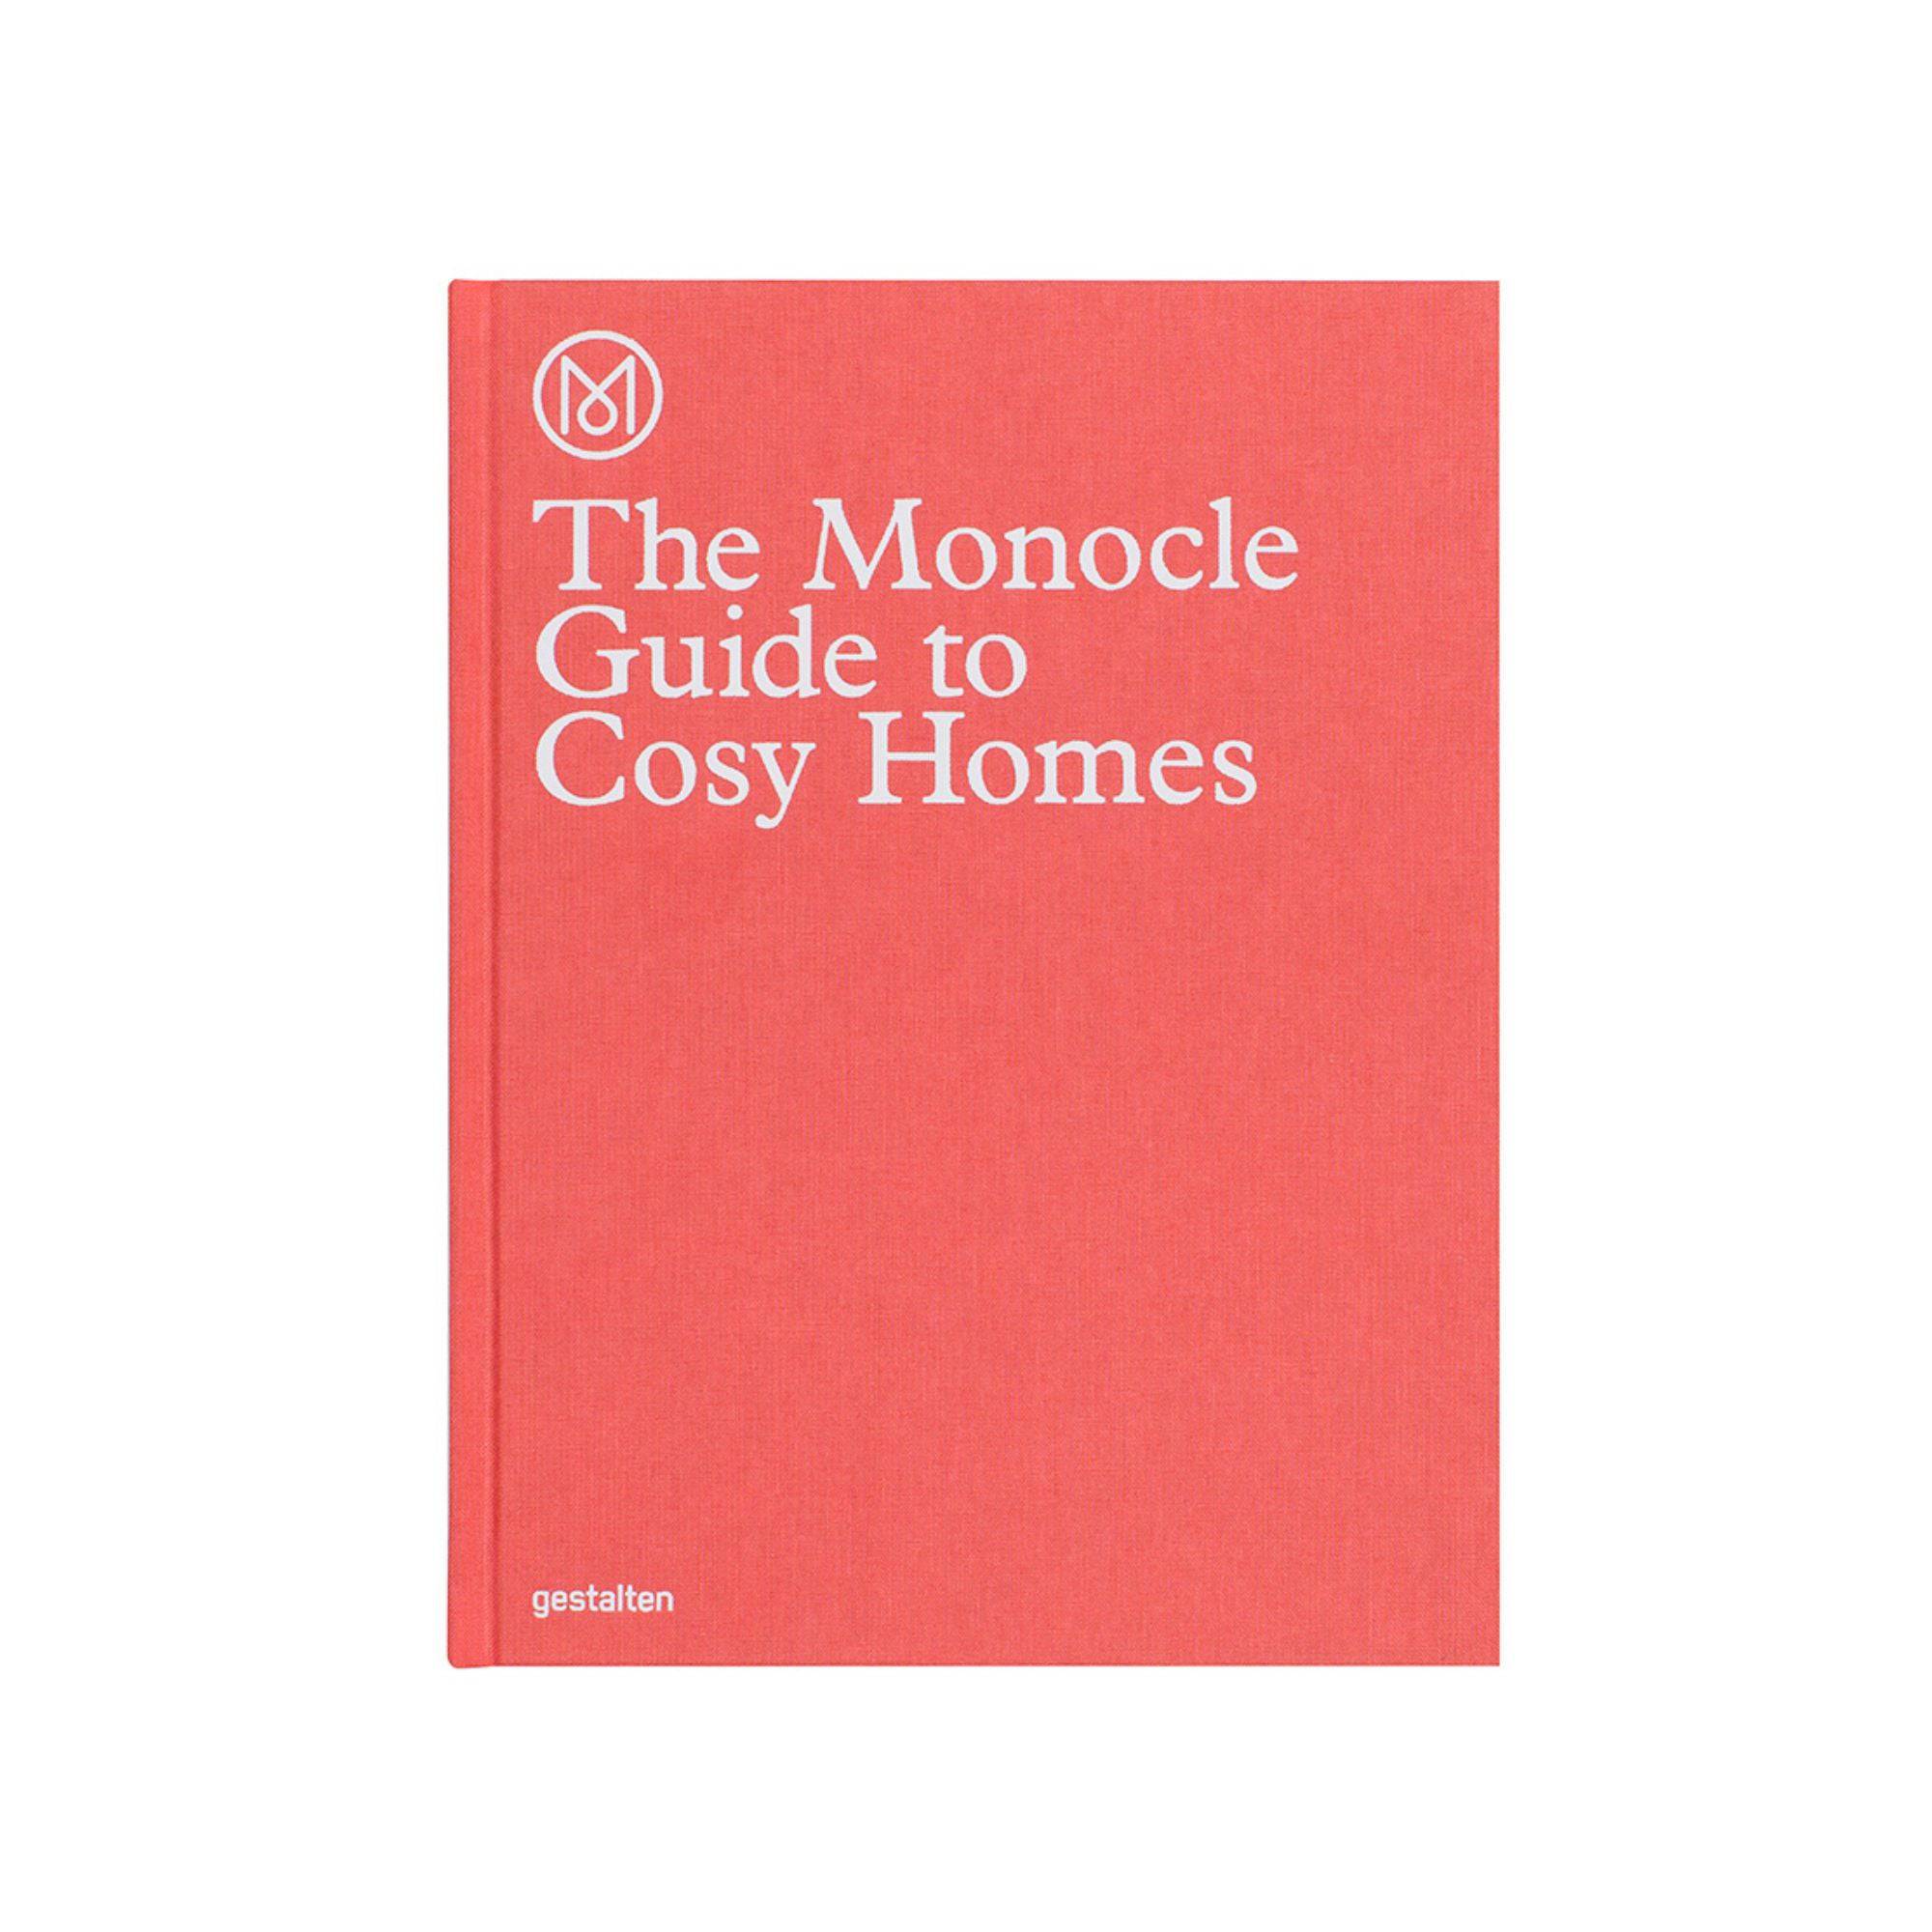 The Monocle Guide for Cozy Homes